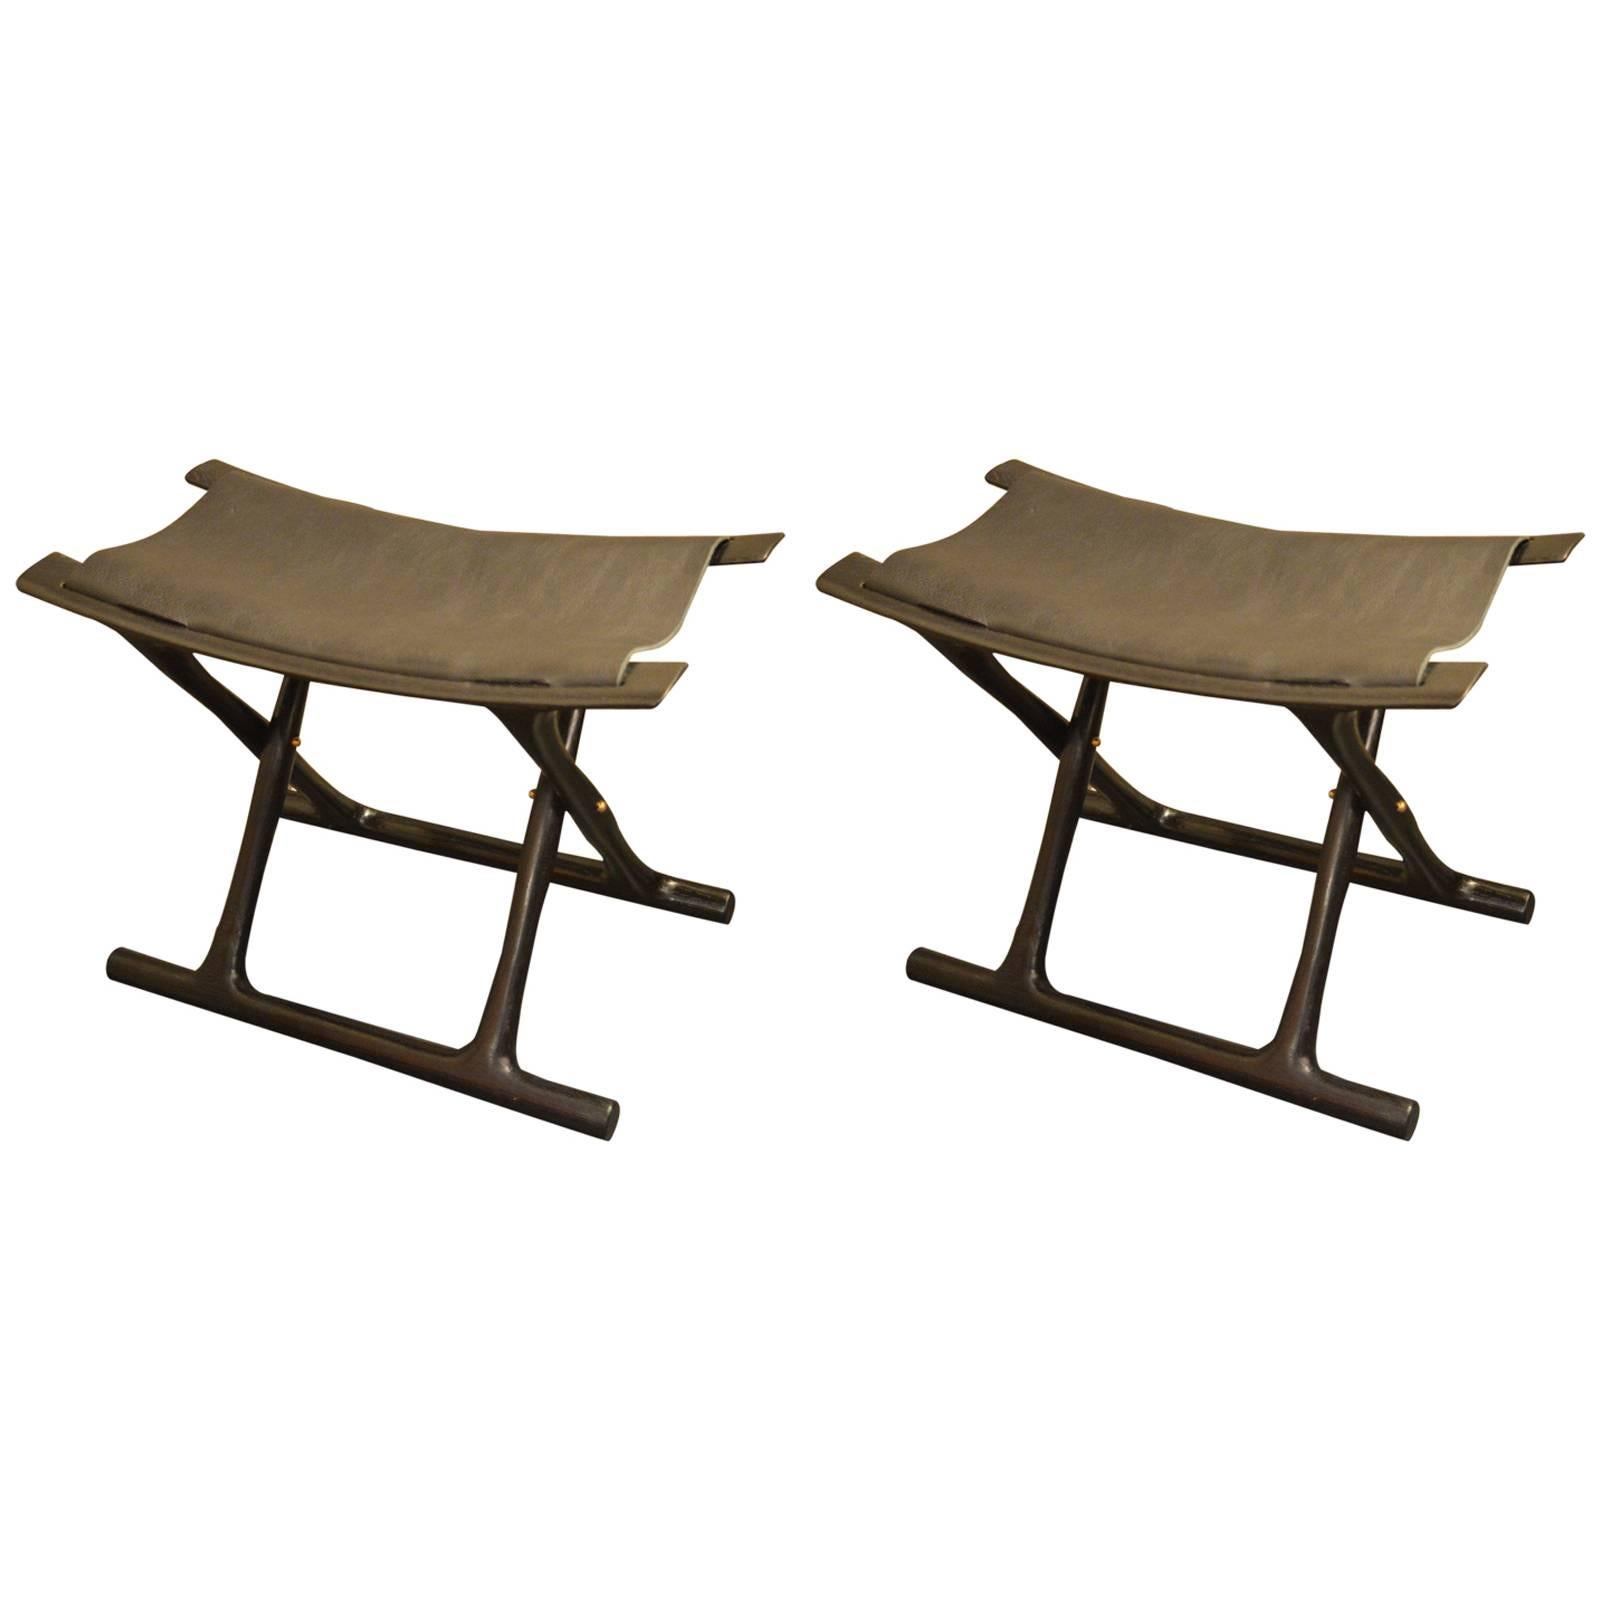 Pair of Wooden Stools with Leather Seats